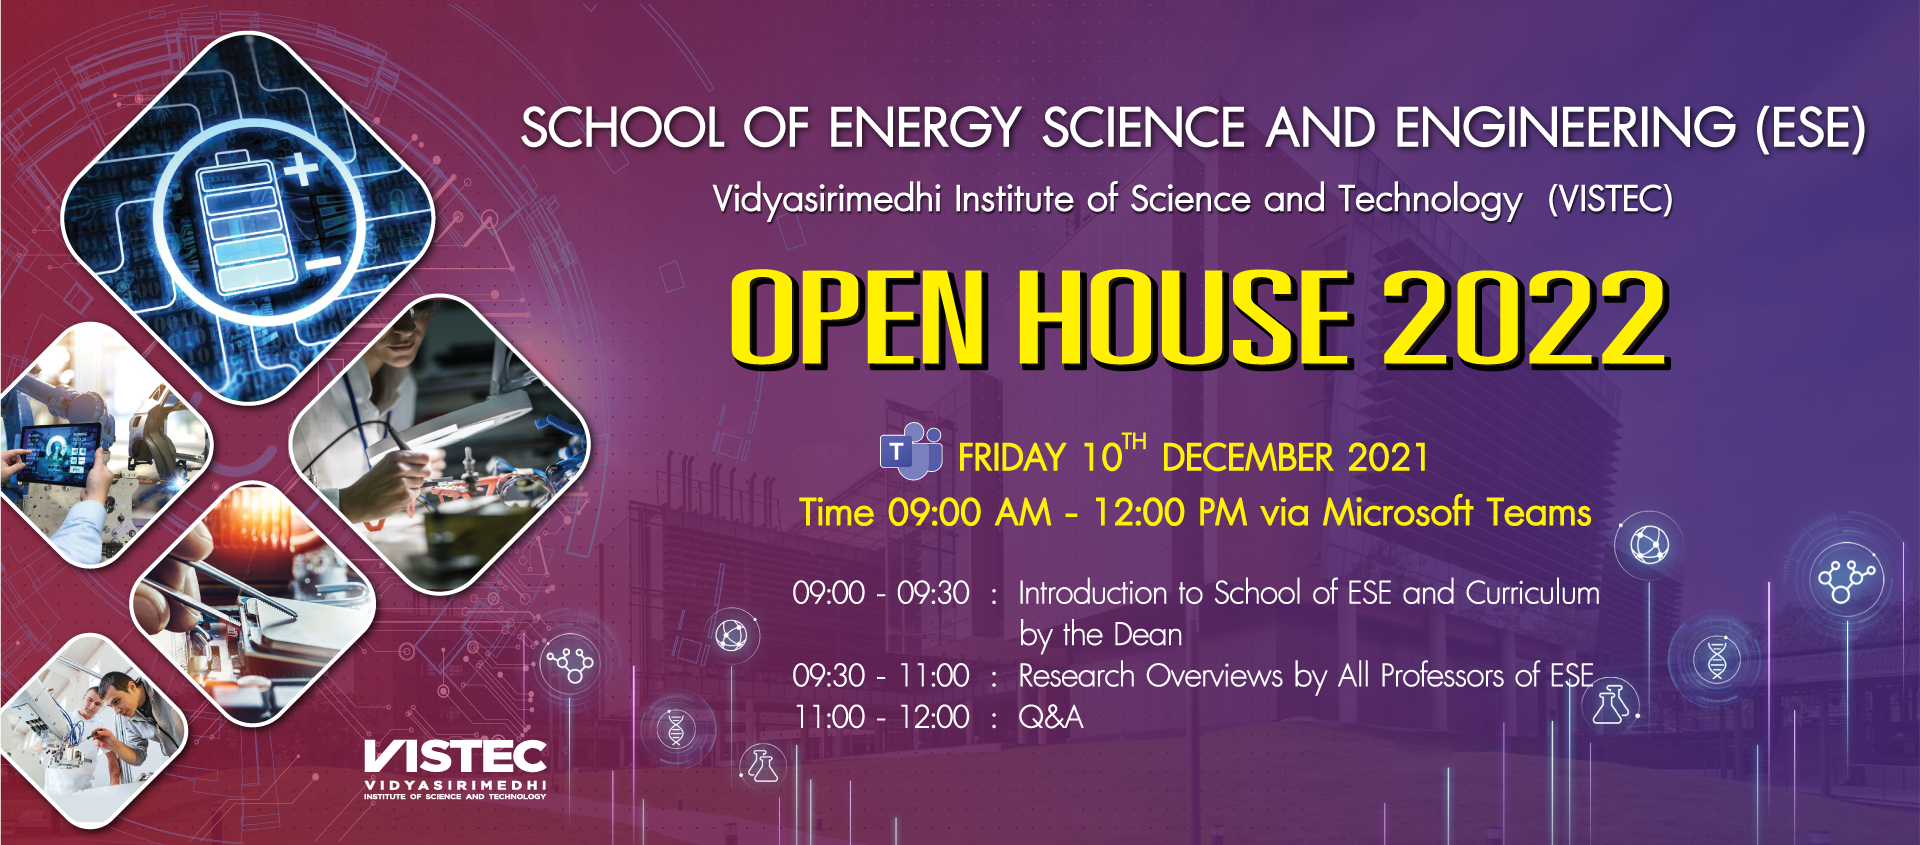 Final chance for you (everyone, not just students) to register for the open house of the School of Energy Science and Engineering (ESE) at VISTEC in Wangchan Valley, Rayong Thailand In the event, you will see insight into our research activities from all 